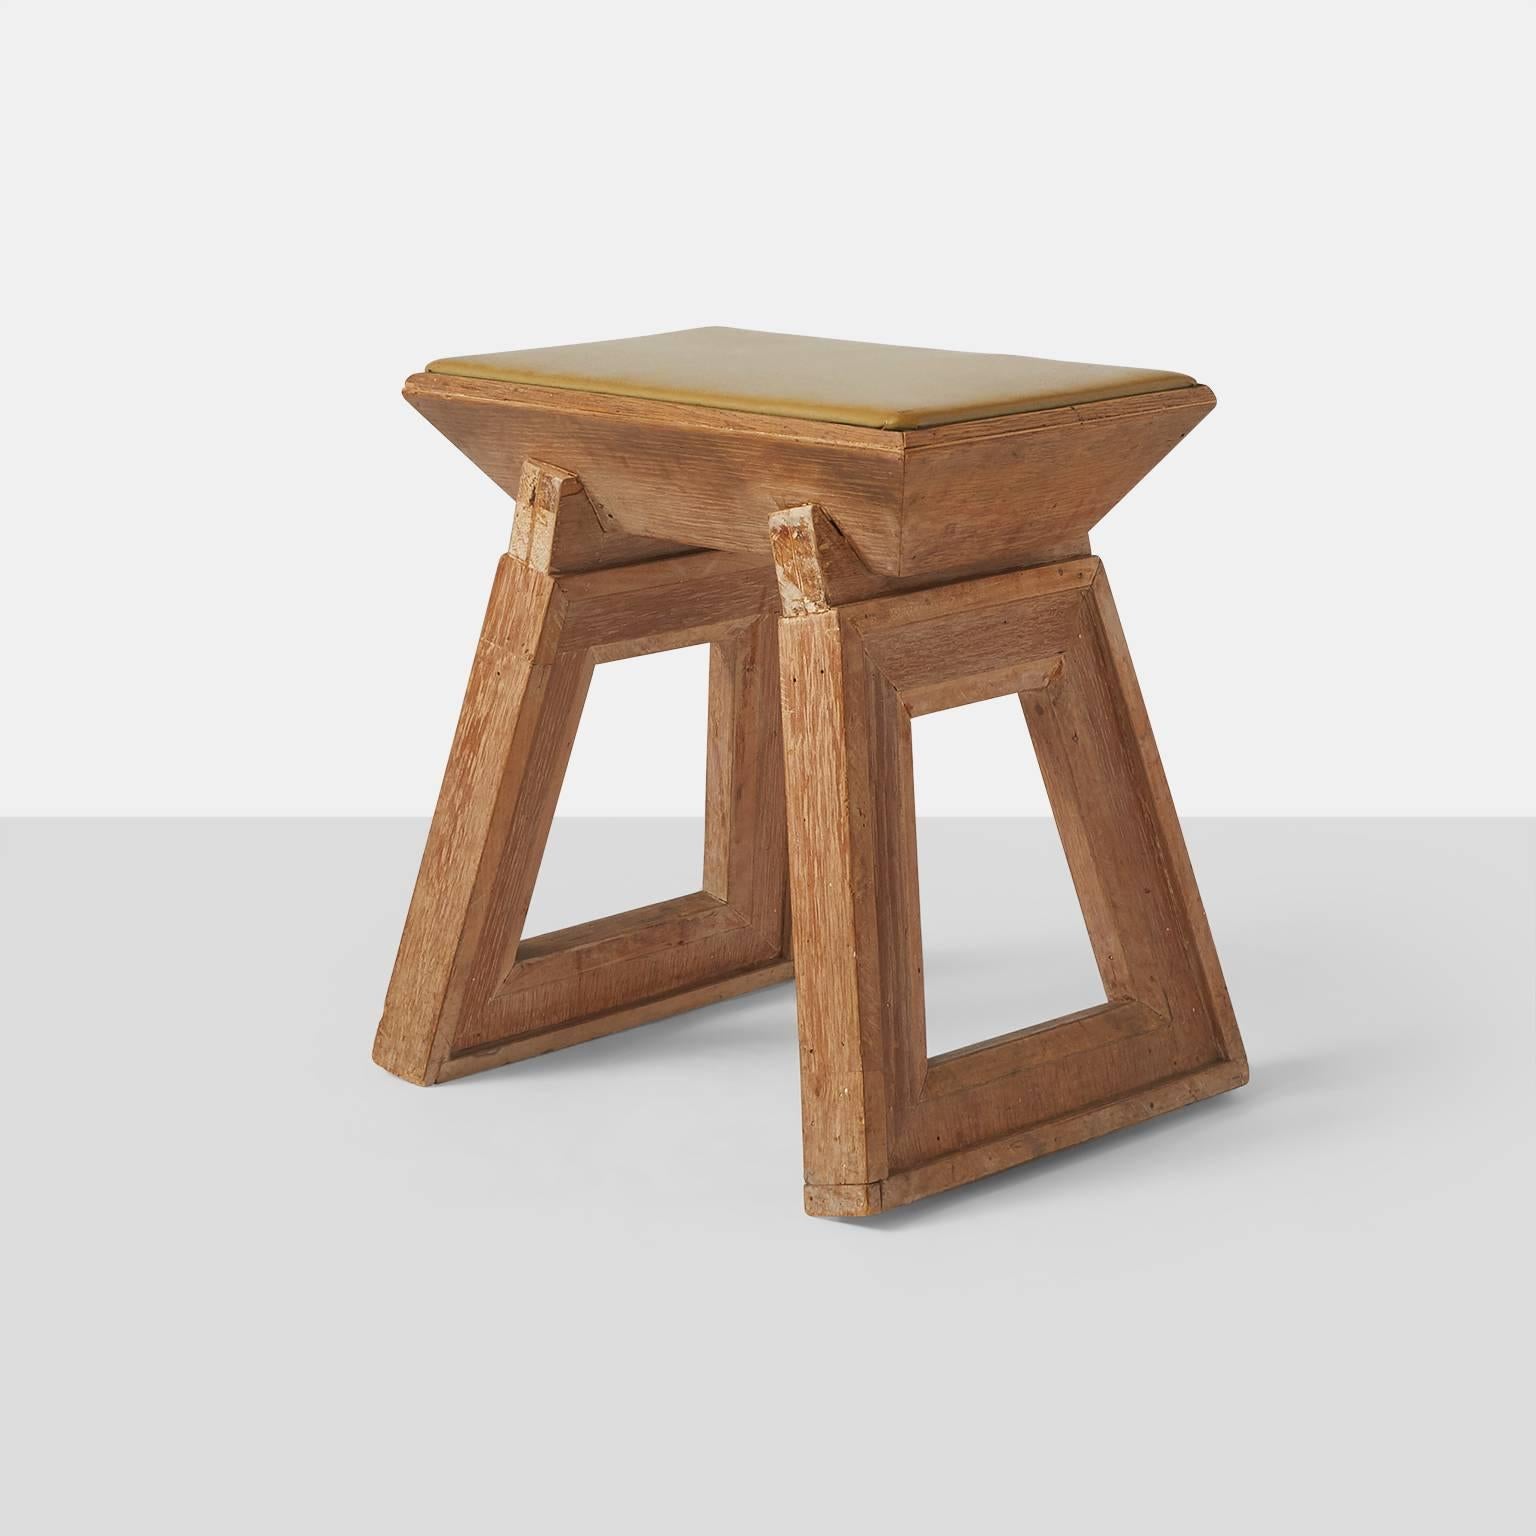 A unique architectural stool in limed oak with a leather seat. Framework legs make this a very heavy and sturdy seat,
circa 1940s, USA.